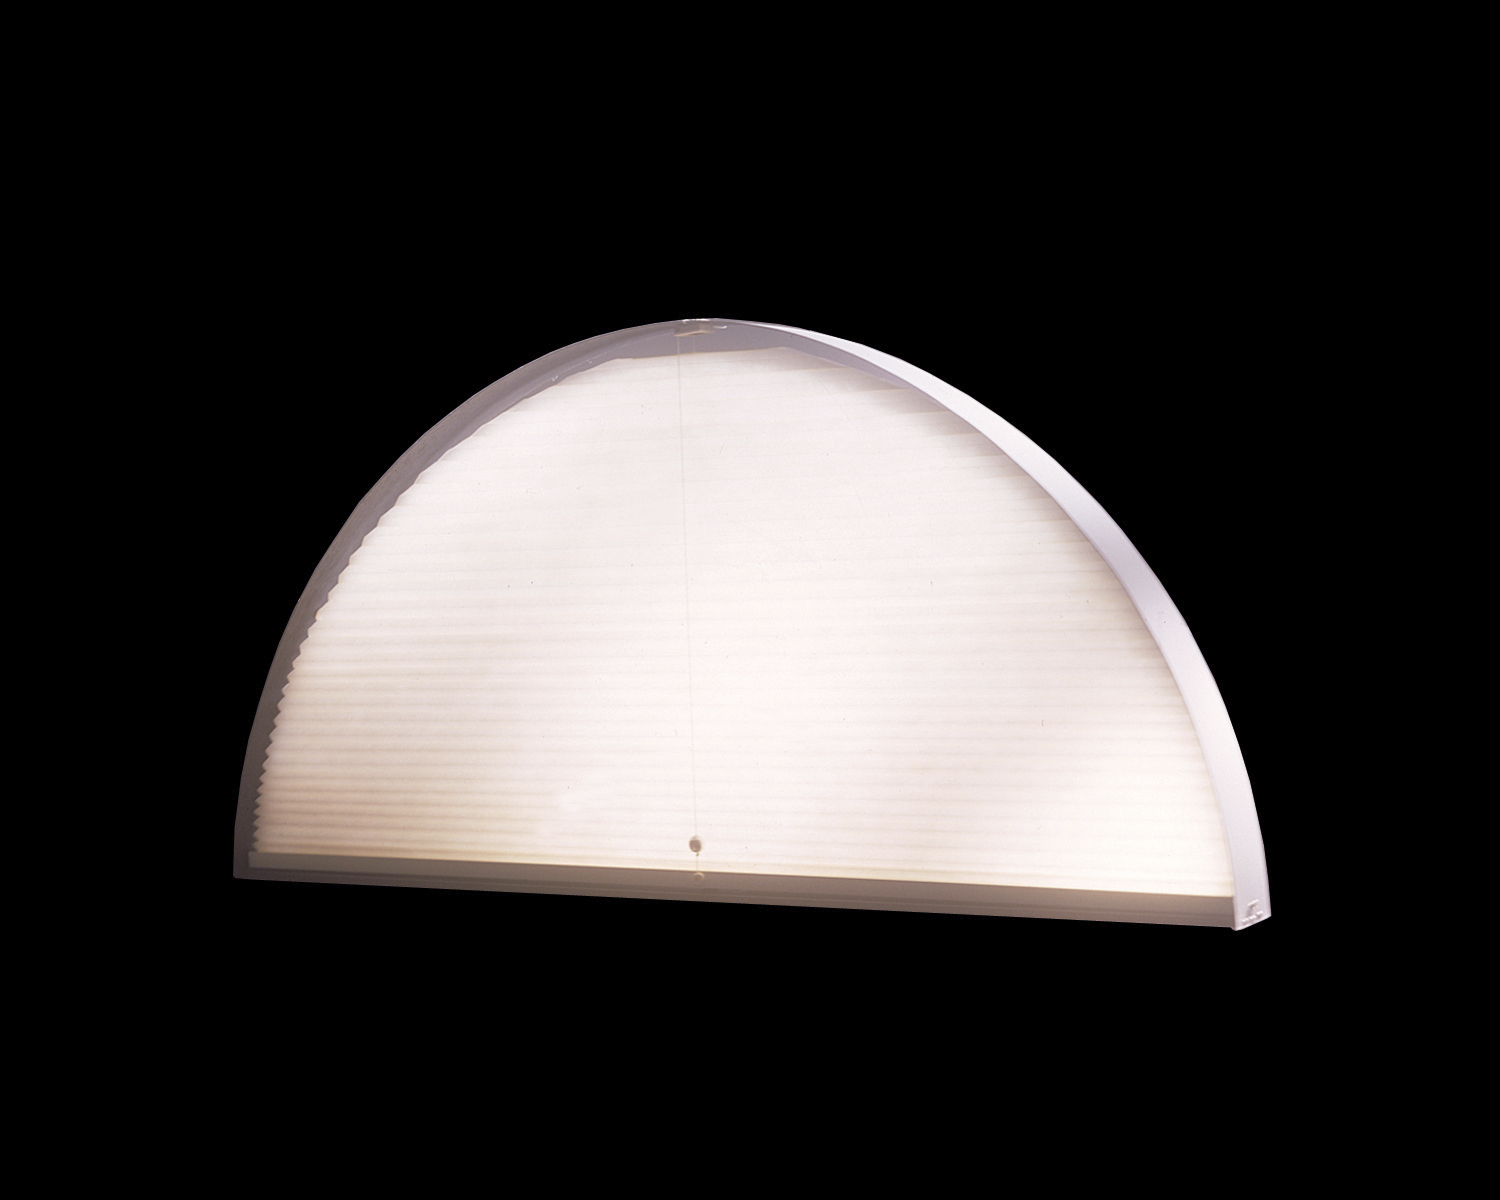 Our brand arch shade made with 3/8 double cell fabric